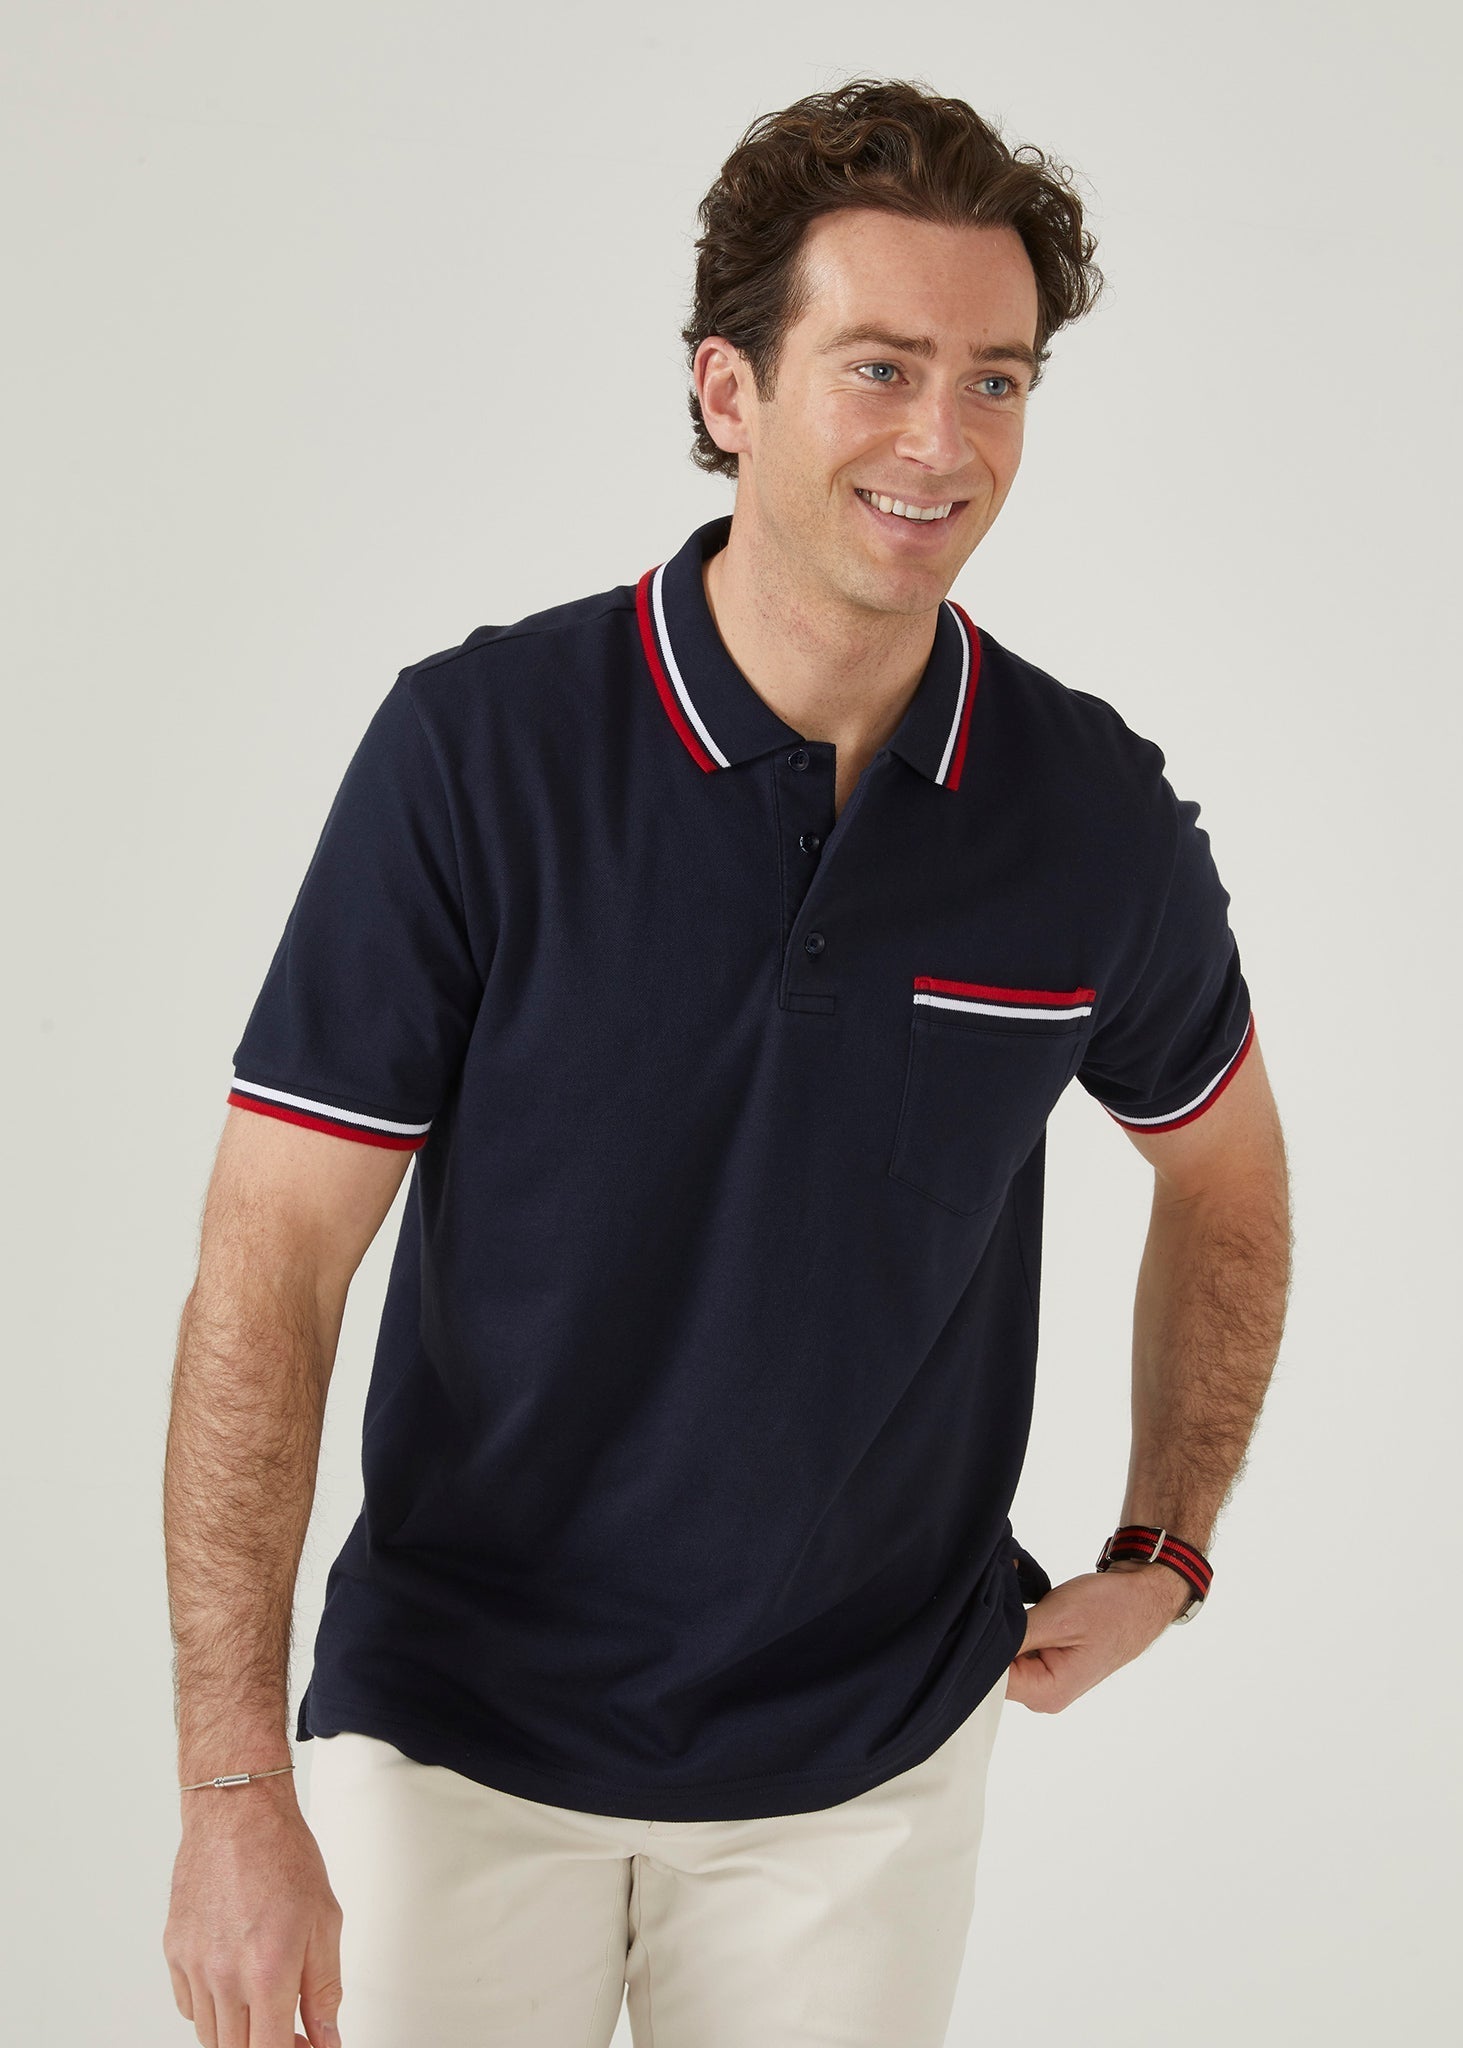 short sleeved pique polo shirt with trim in navy.